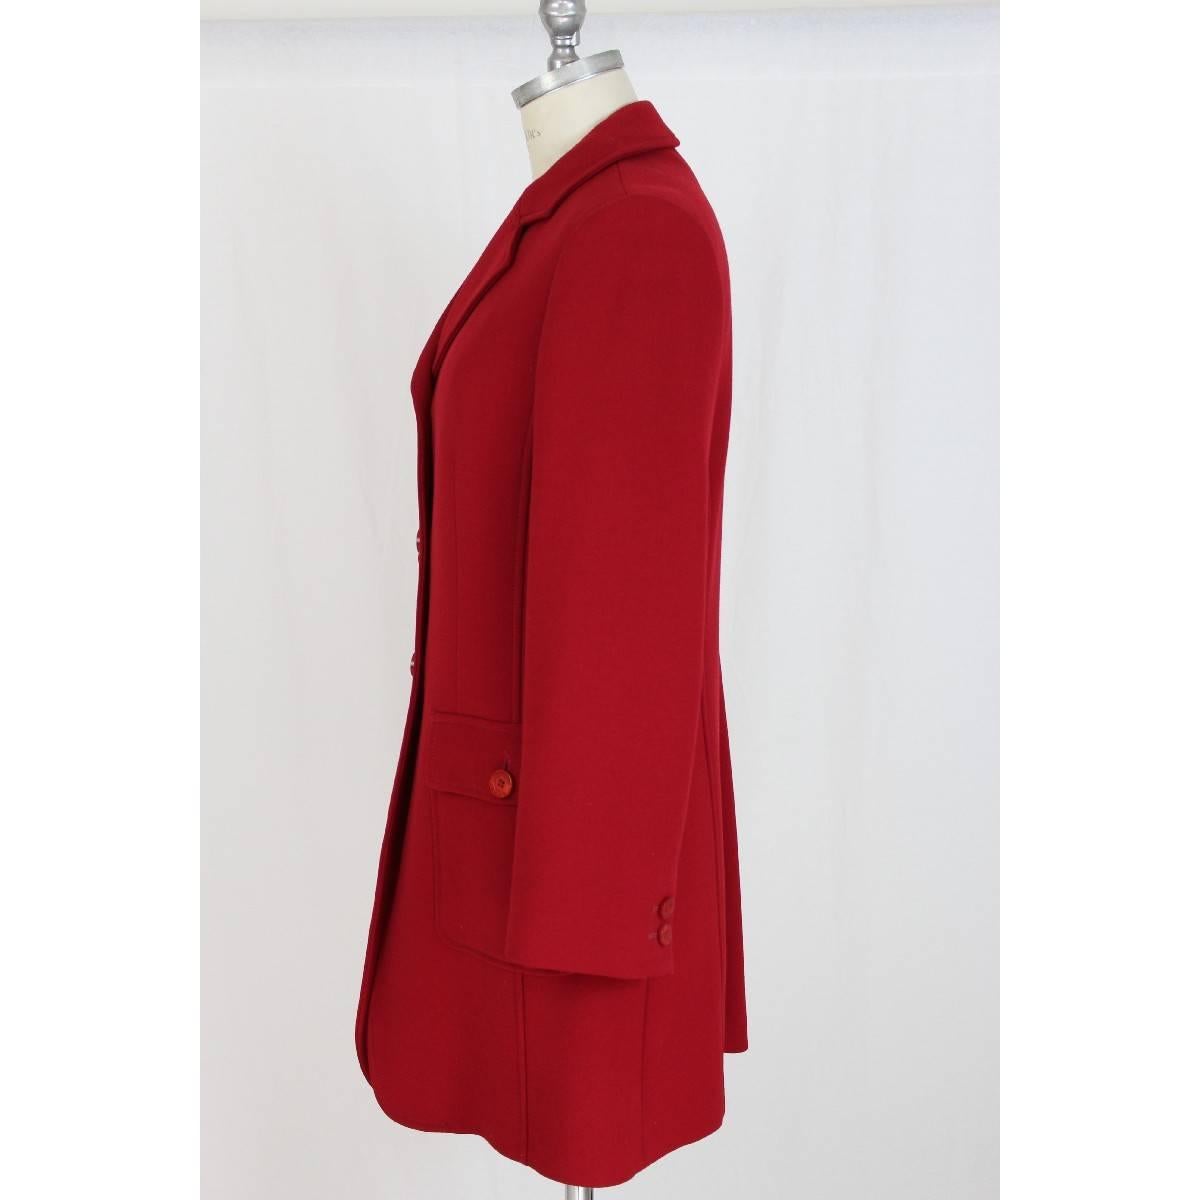 Moschino long red vintage coat. Three buttons, two front pockets not in line. Excellent woolen fabric. Slim fit. Buttoned buttons, lined. Excellent vintage condition.

Size: 42 It Us 8 Gb 12 Fri 38 De 38

Shoulder: 42 cm
Chest/Bust: 48 cm
Length: 94